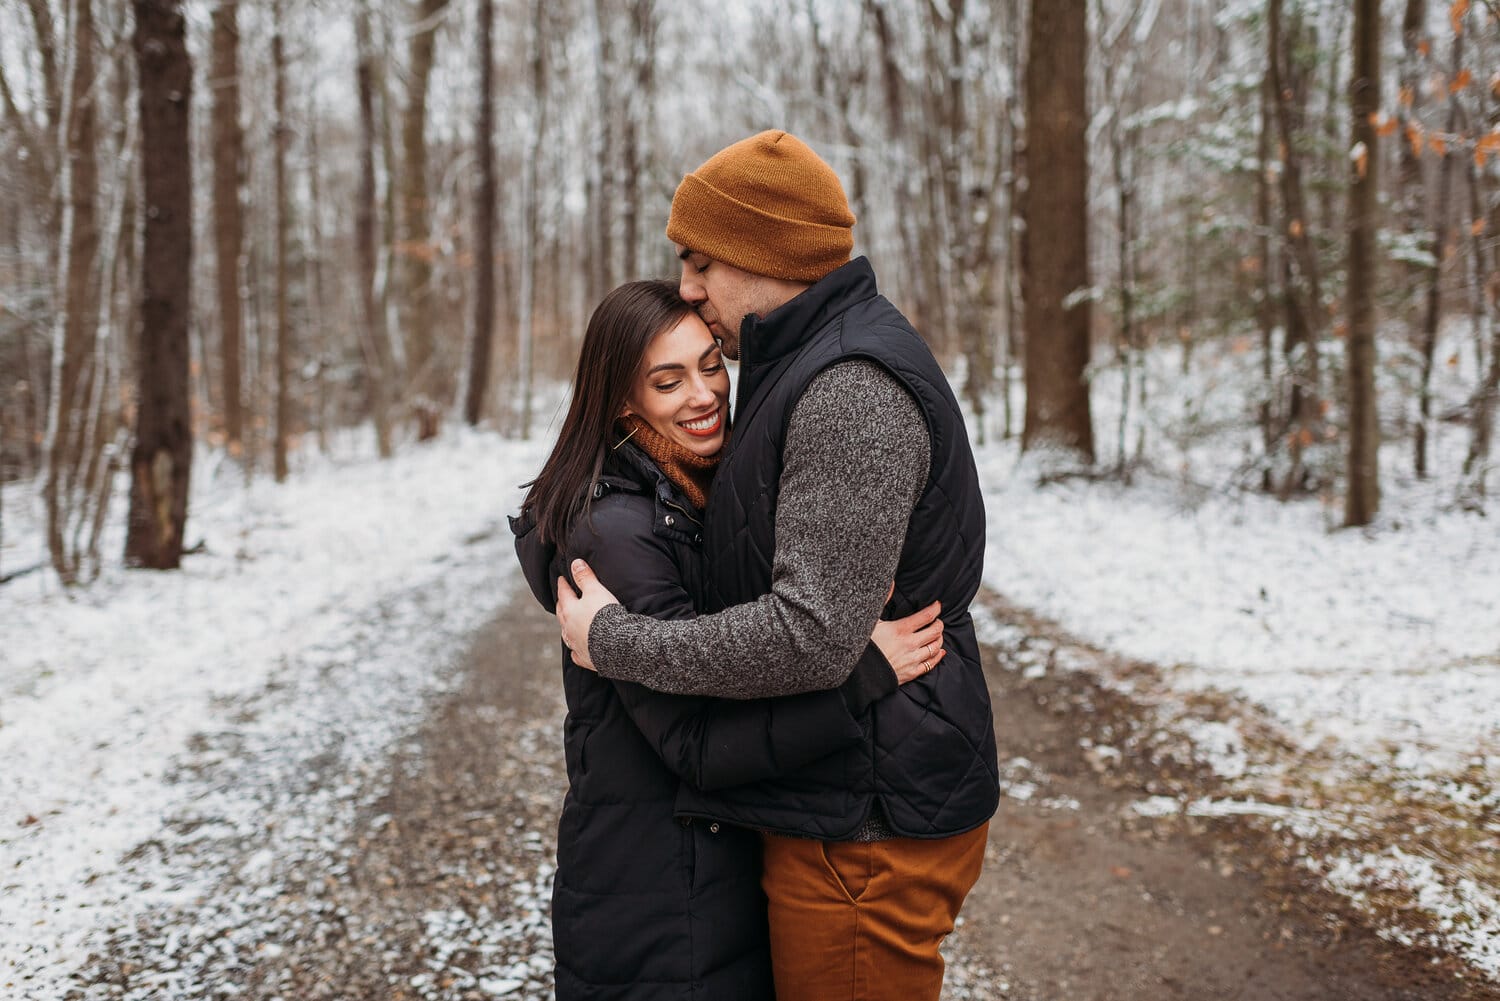 Couple standing in a winter forest, with the man embracing the woman